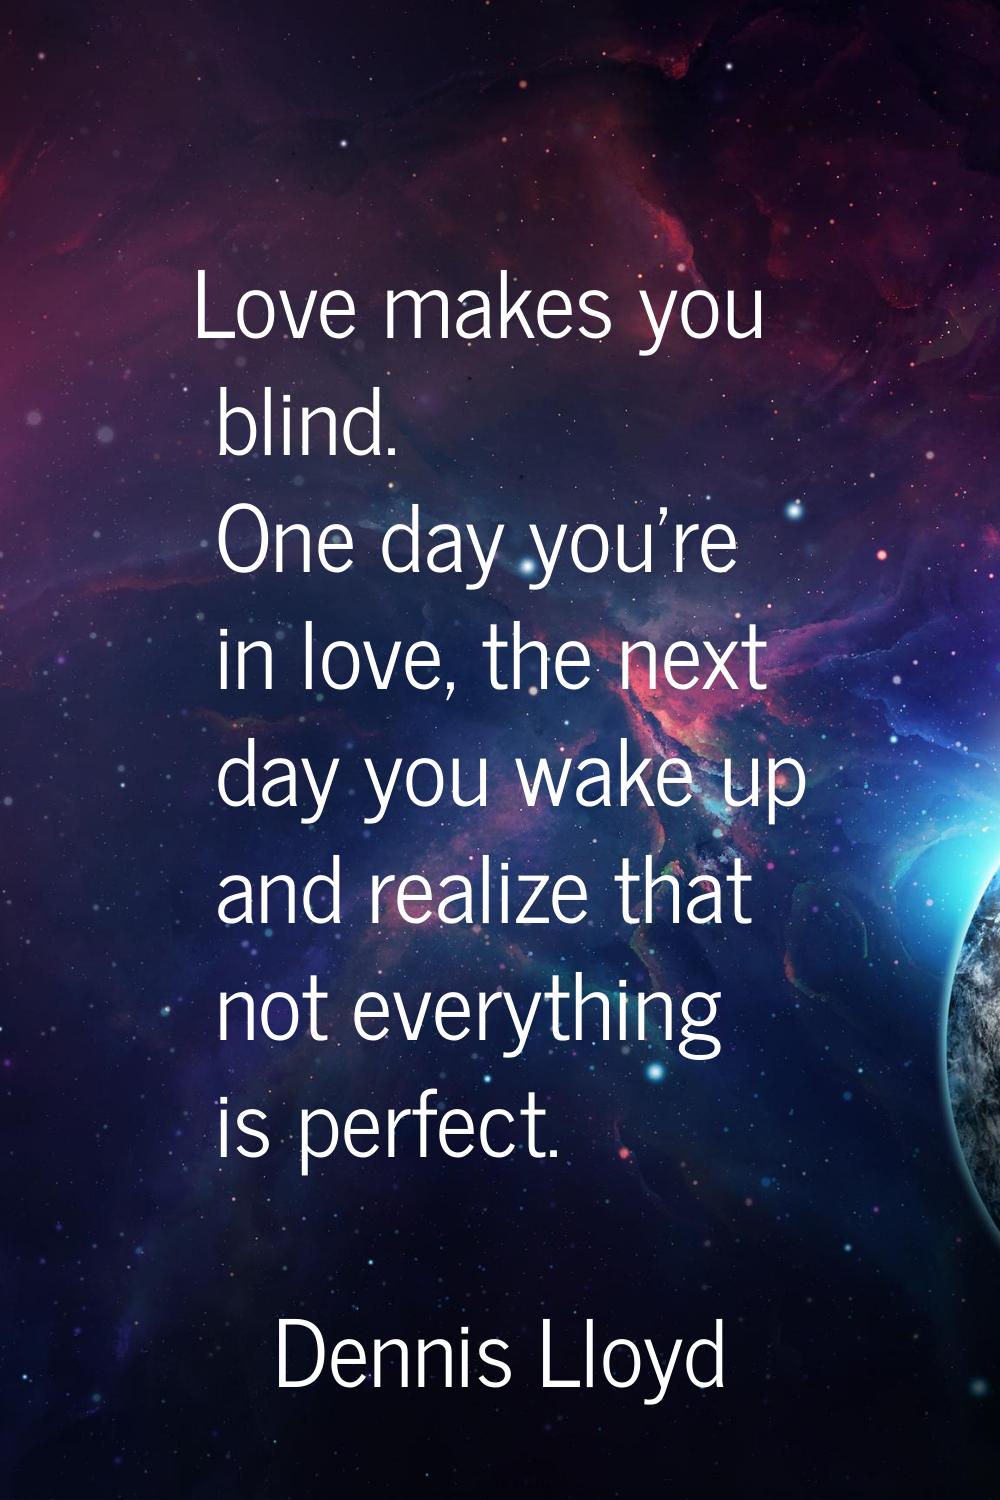 Love makes you blind. One day you're in love, the next day you wake up and realize that not everyth